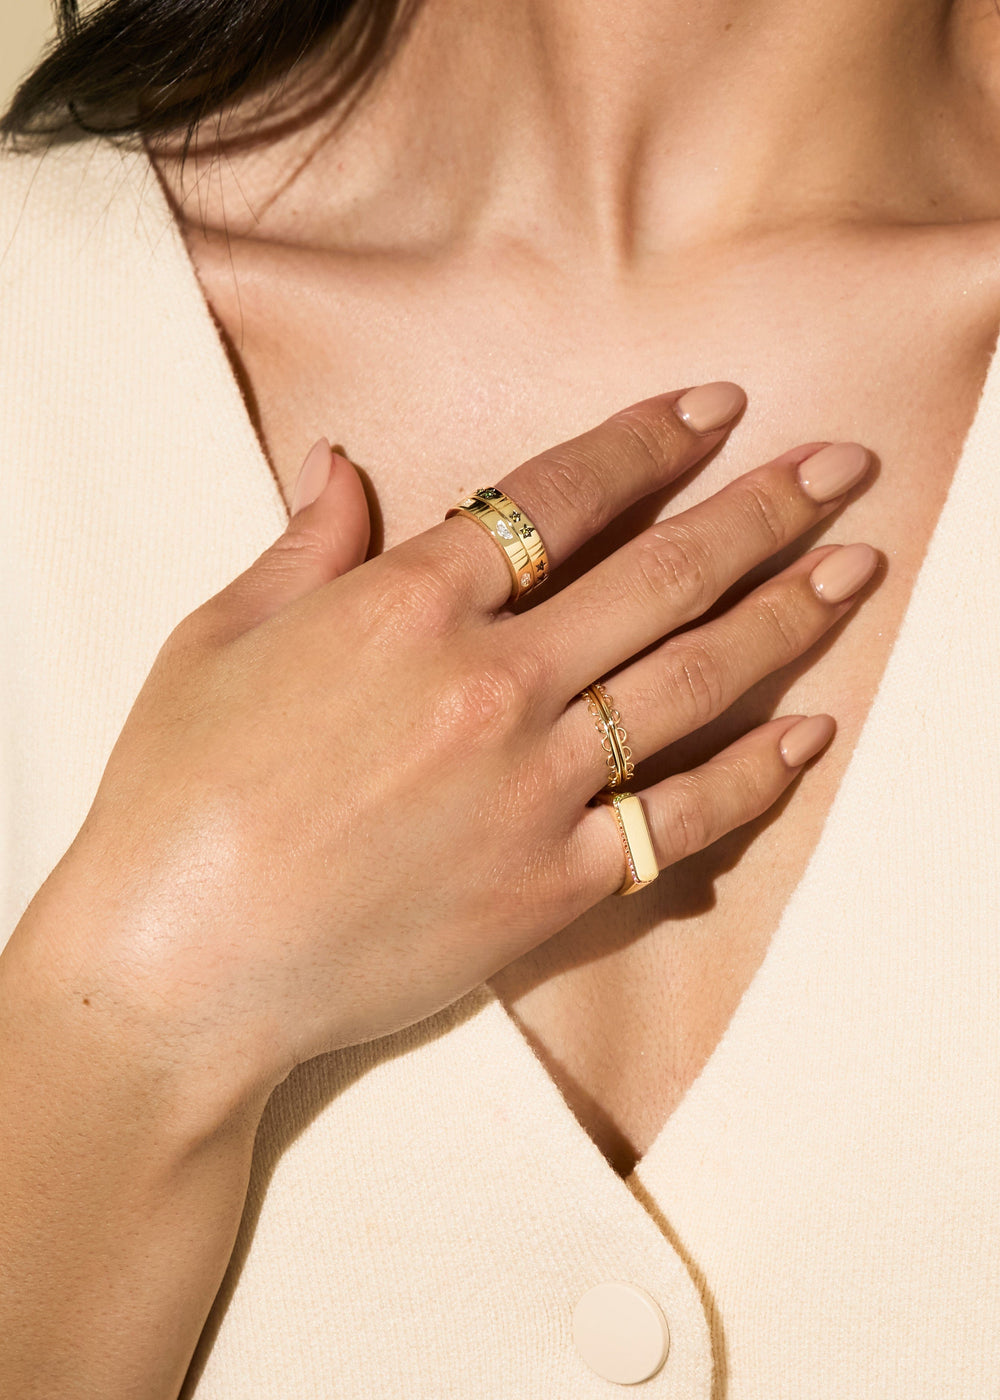 Mined + Found Rings blank slate ring, rainbow